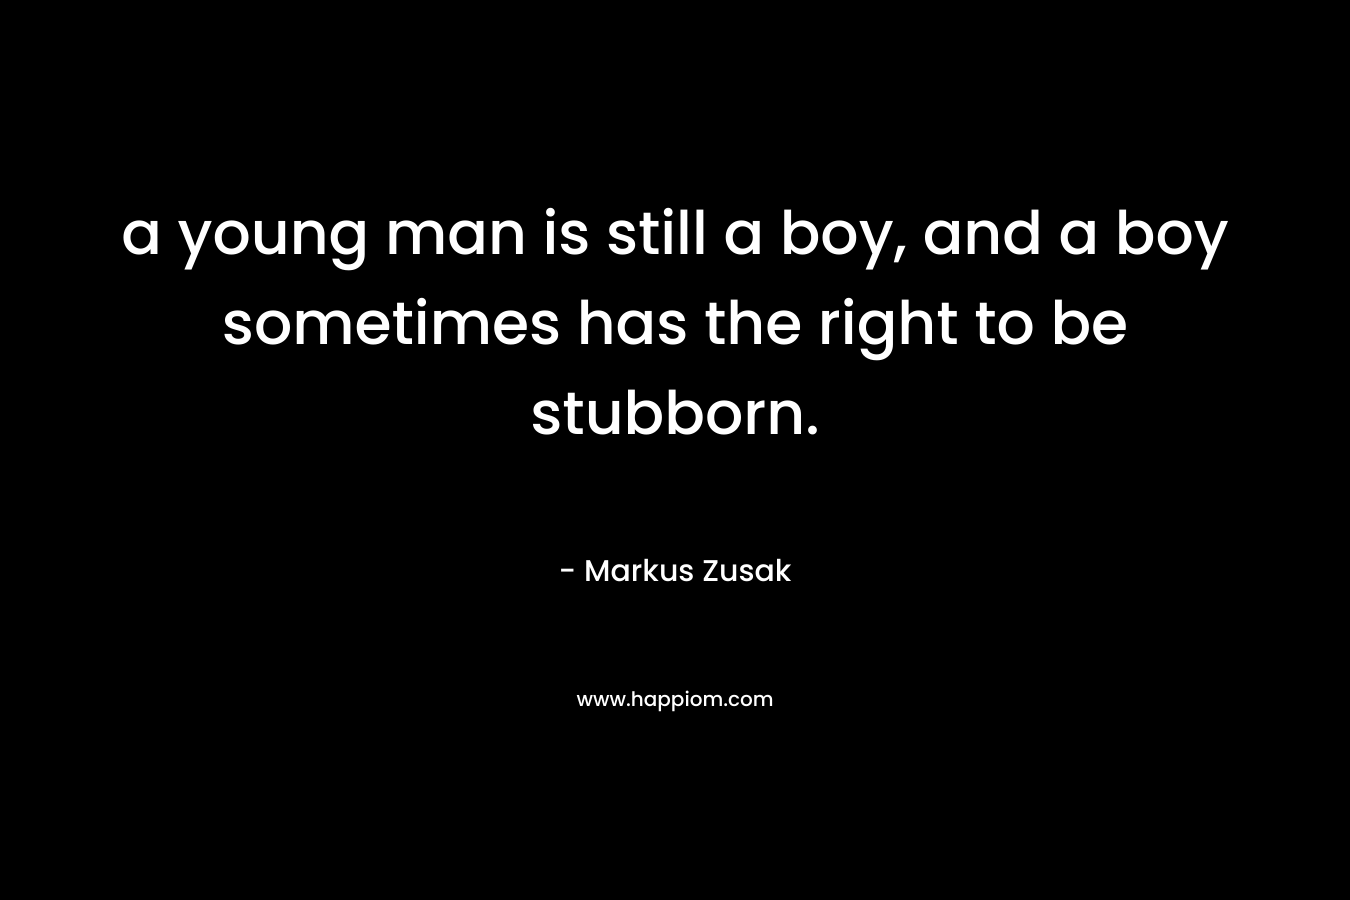 a young man is still a boy, and a boy sometimes has the right to be stubborn.